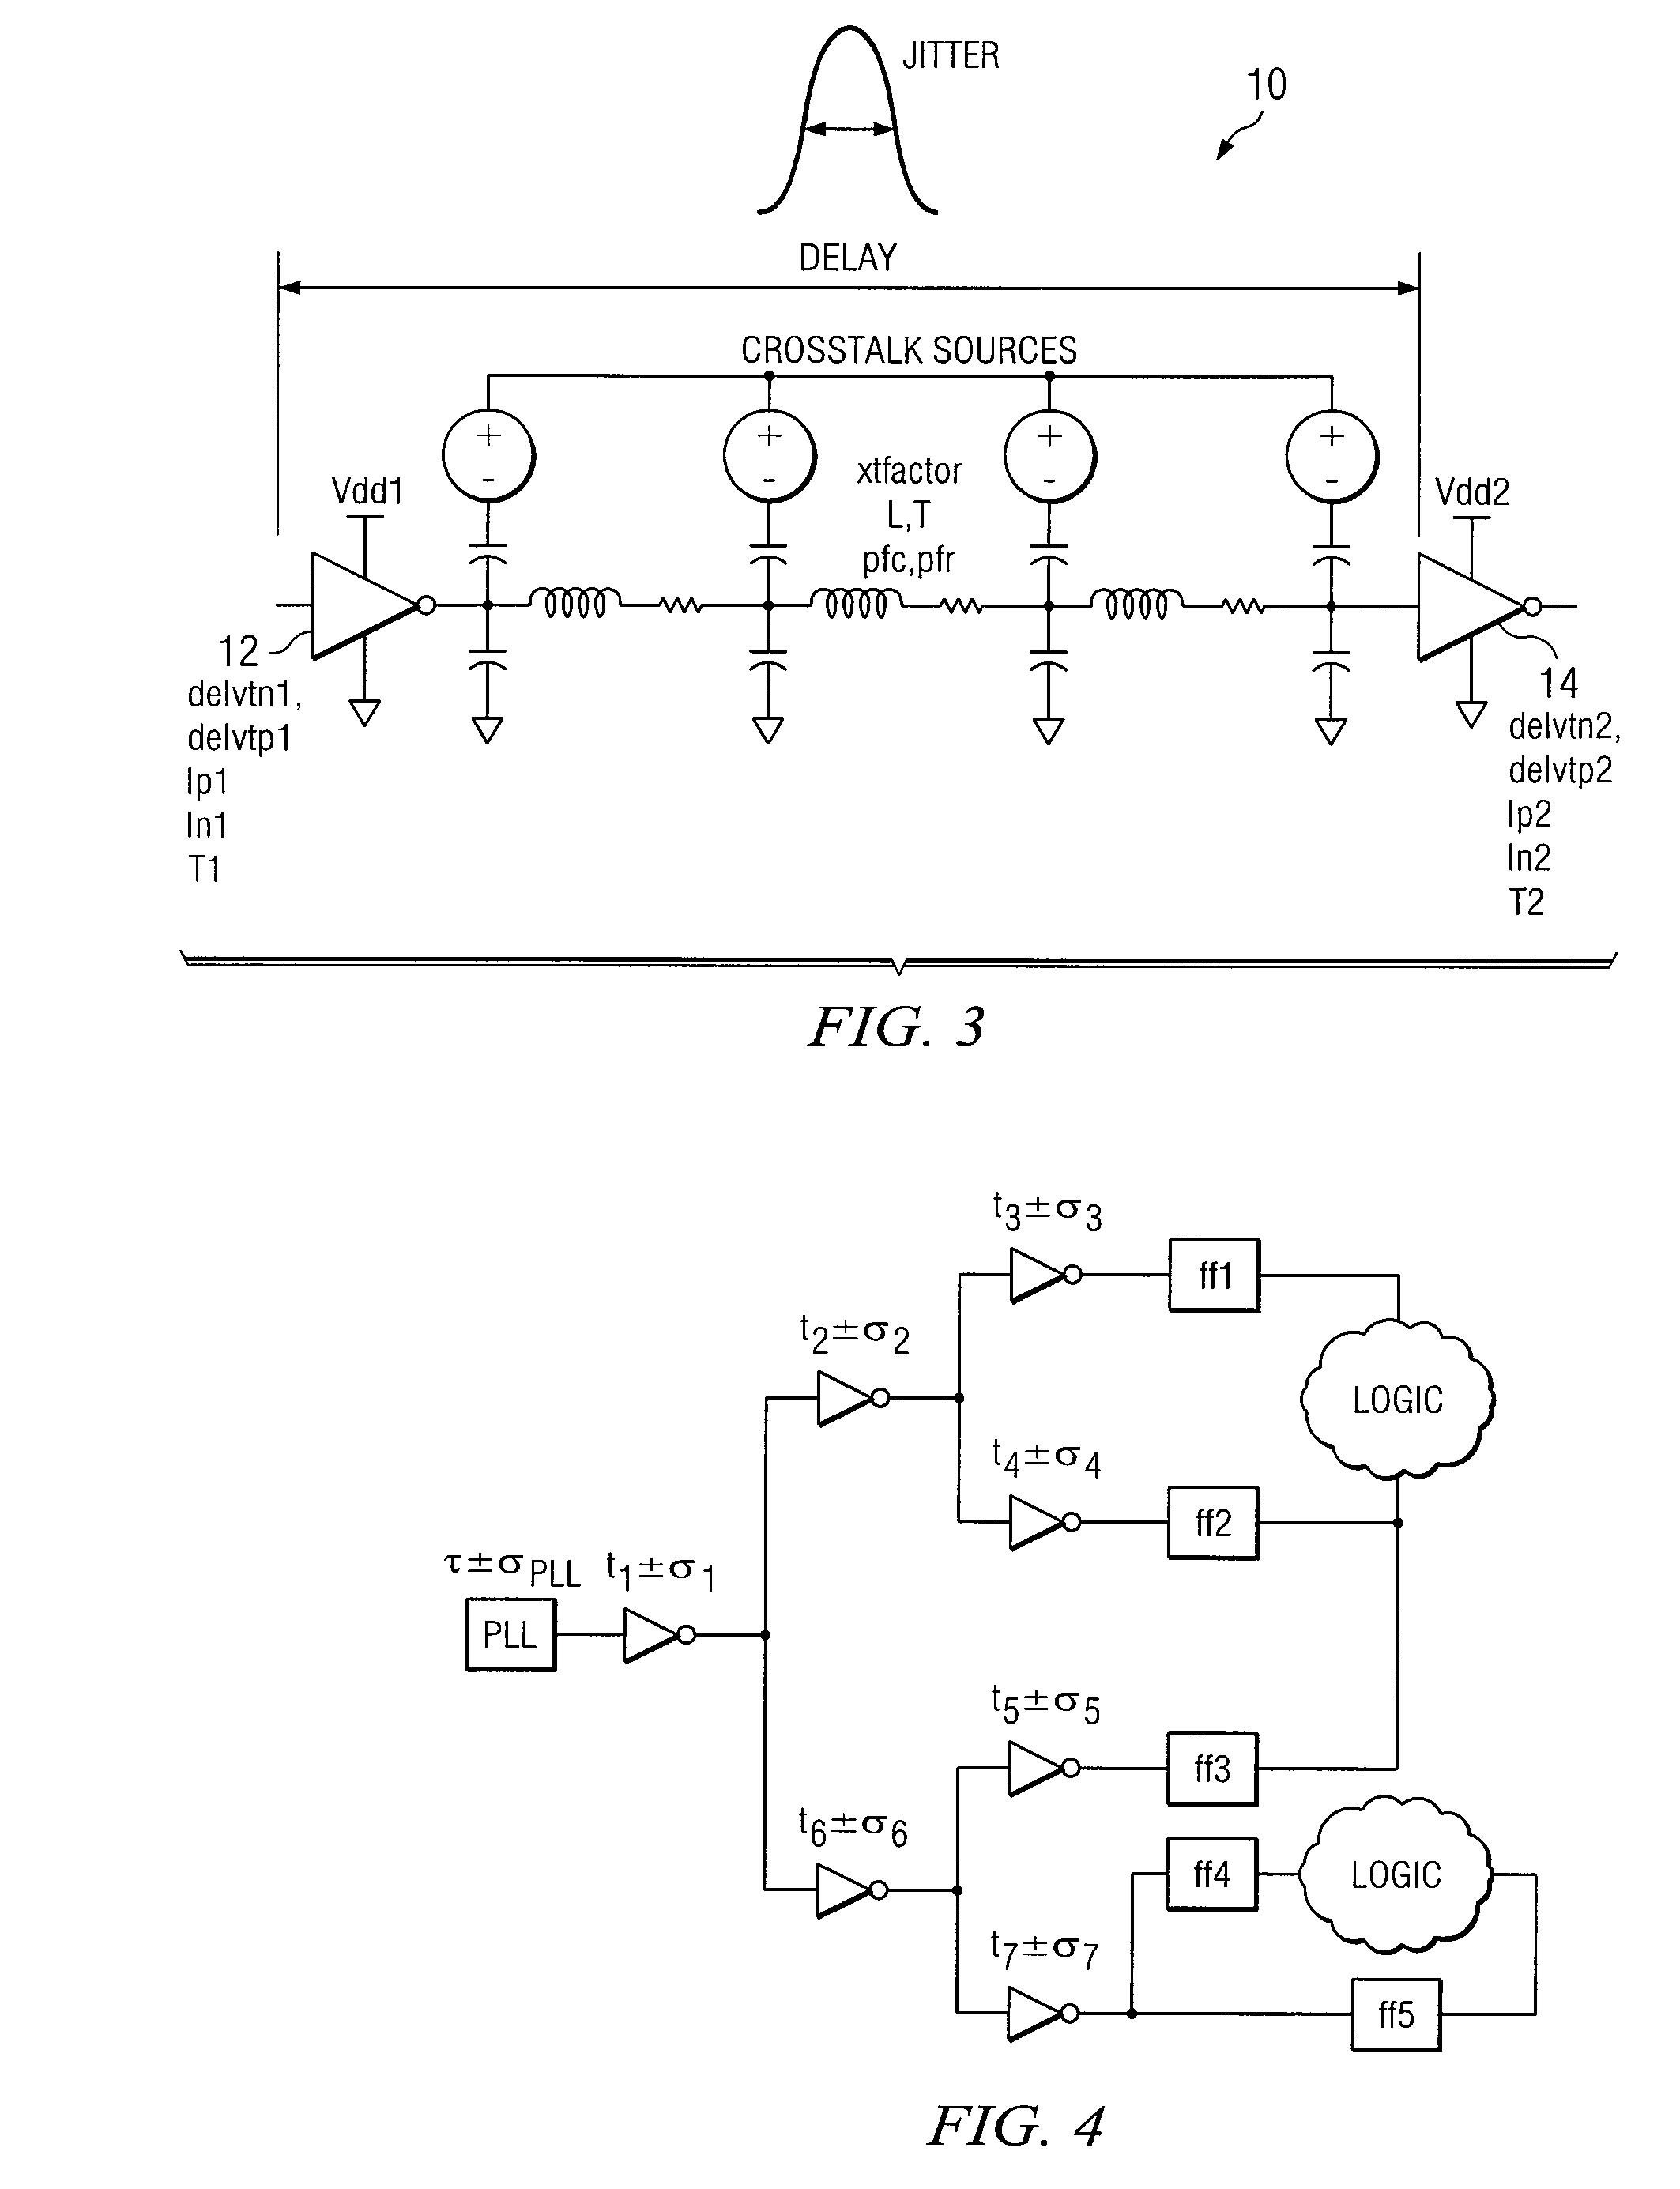 Estimating Jitter In A Clock Tree Of A Circuit And Synthesizing A Jitter-Aware And Skew-Aware Clock Tree